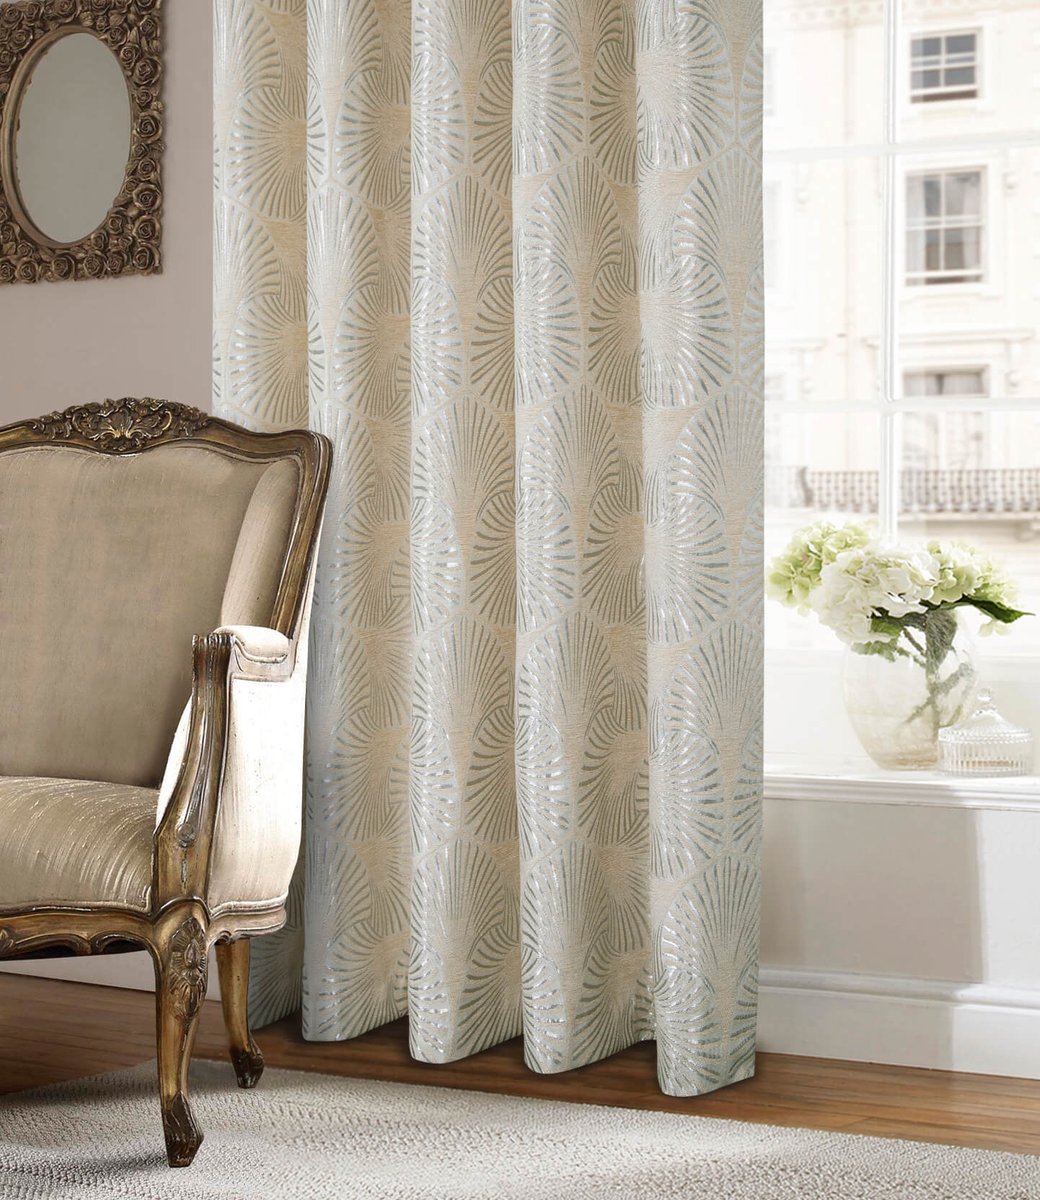 We love our metallic Chrissy 😍ow.ly/keNT50R3Zu2

#design #of #the #month #chrissy #blue #natural #grey #lined #jacquard #eyelet #curtains #window #dressing #wow #love #themillshopnottingham #now #in #stock #homedecor #homestyling #homestyle #homeinspo #loveyourhome